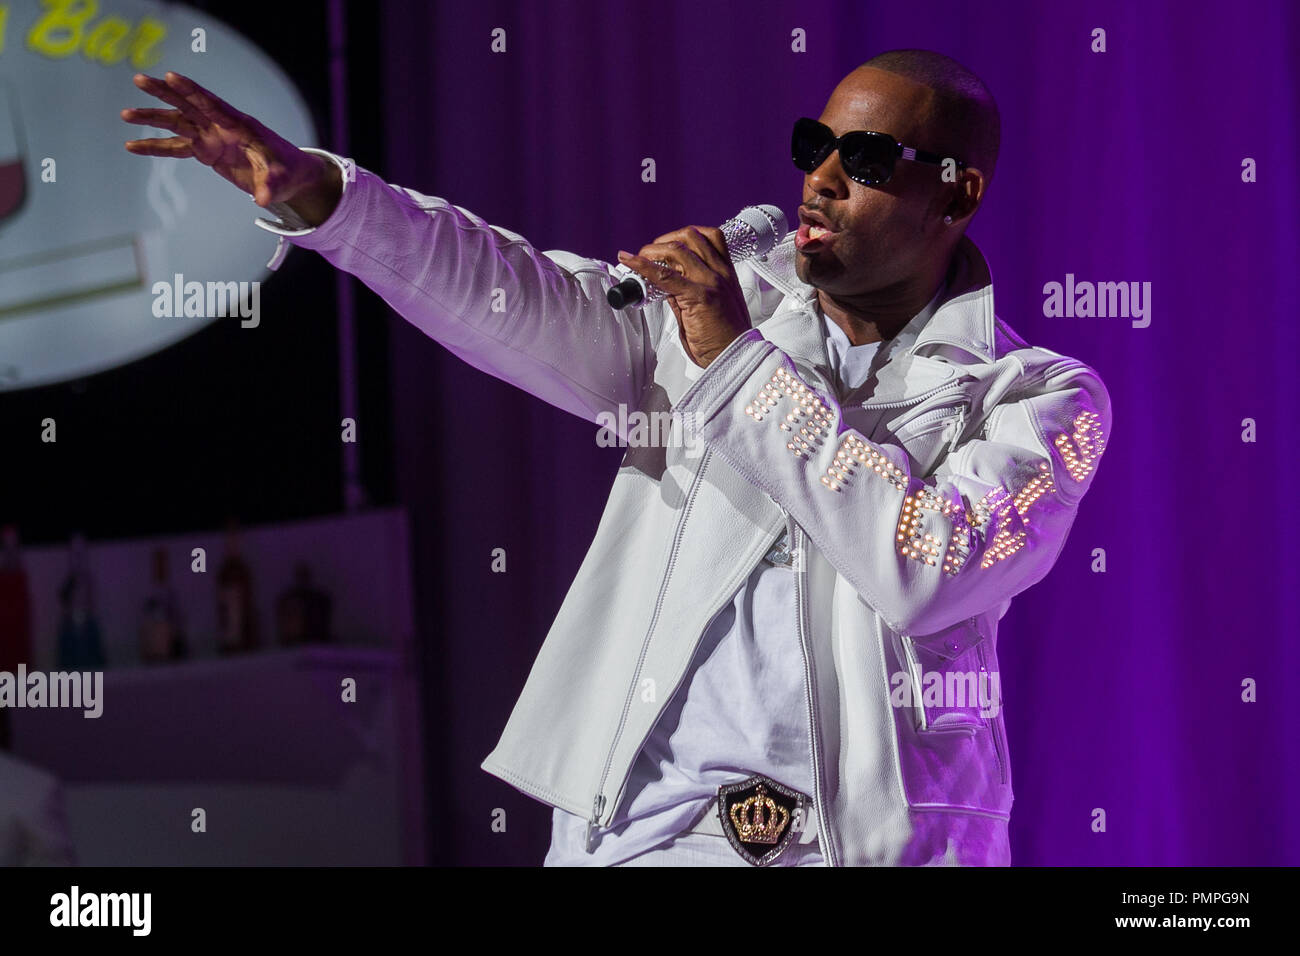 R Kelly performs during his 'Single Ladies' tour at Nokia Theatre L.A. LIVE on November 2, 2012 in Los Angeles. CA. Photo by Eden Ari / PRPP / PictureLux  File Reference # 31687 019PRPPEA  For Editorial Use Only -  All Rights Reserved Stock Photo